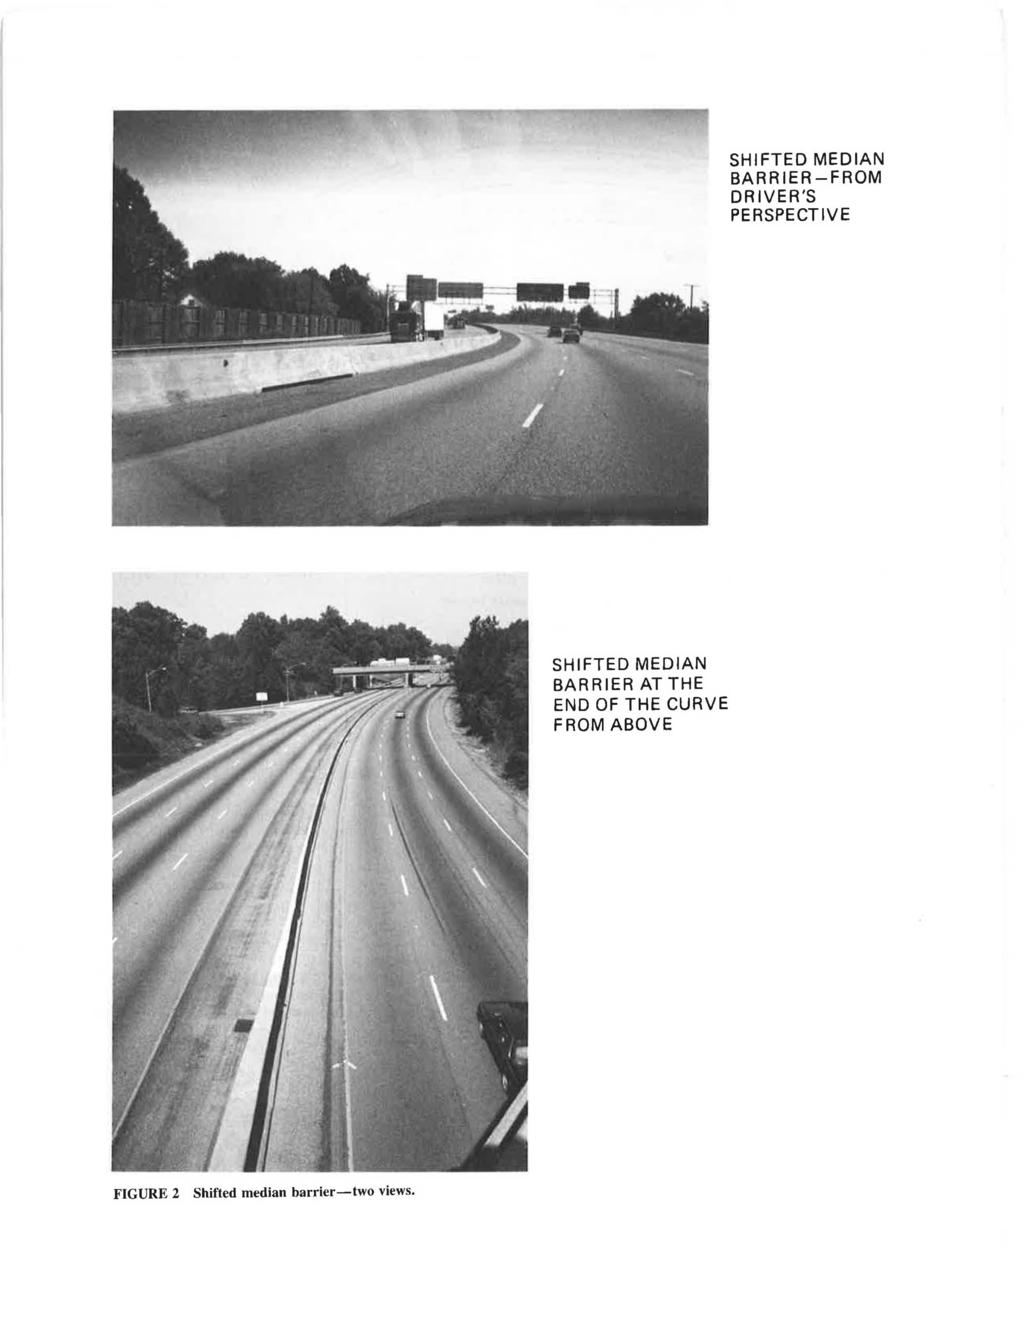 SHIFTED MEDIAN BARRIER-FROM DRIVER'S PERSPECTIVE SHIFTED MEDIAN BARRIER AT